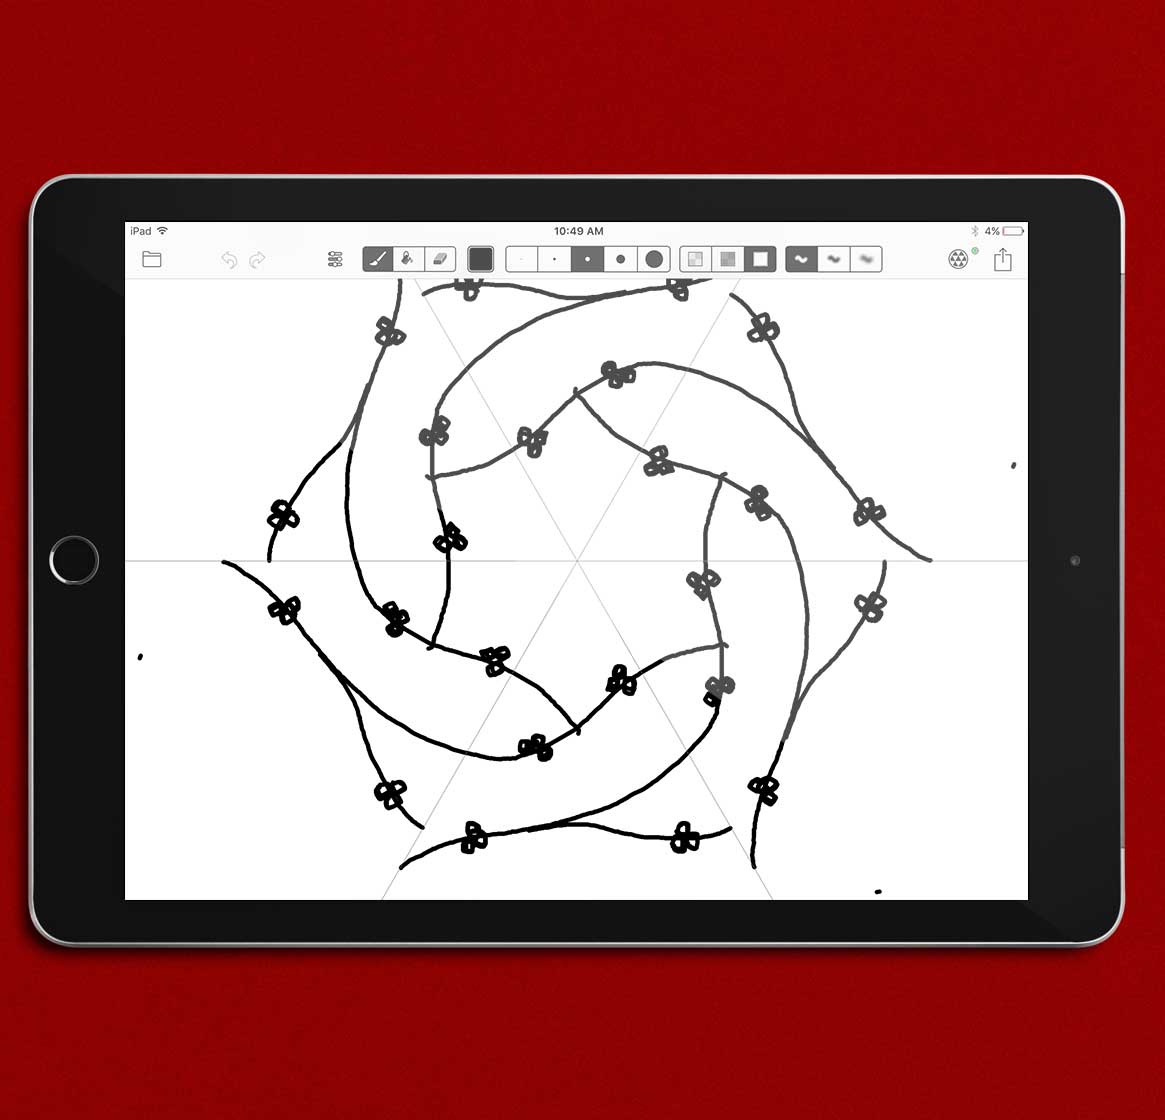 An iPad sitting on a red background displaying a circular pattern on its screen